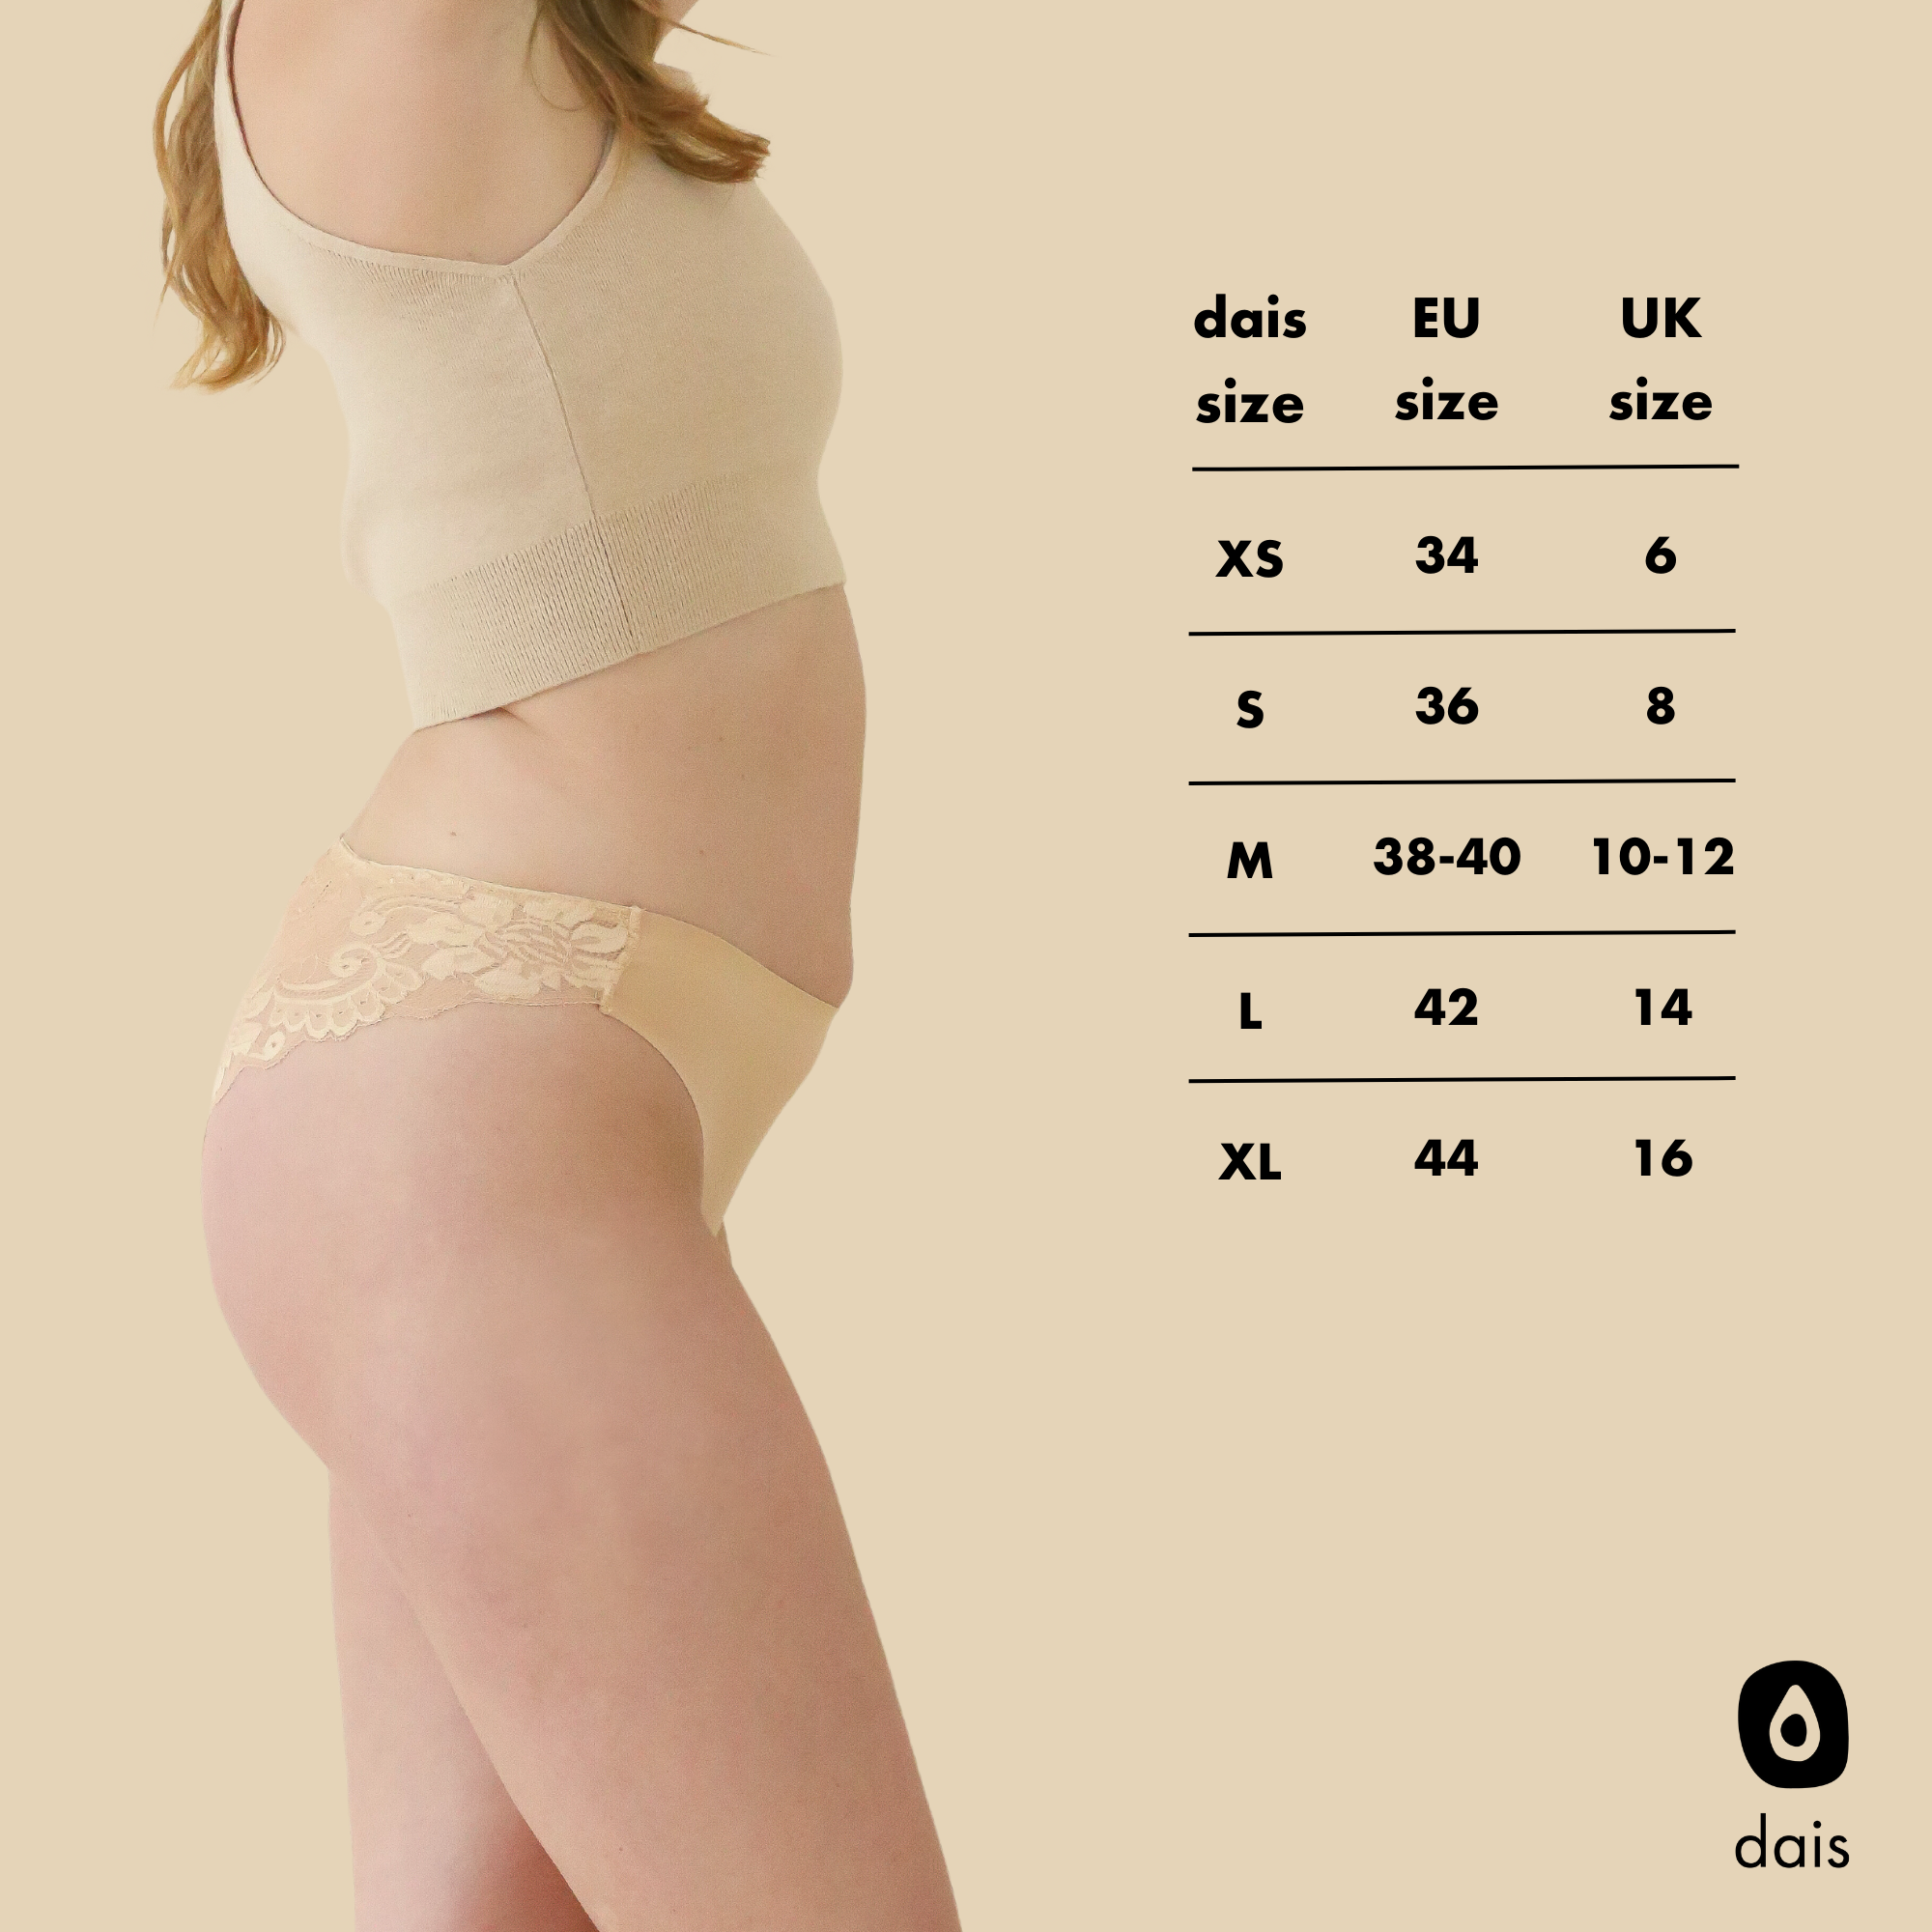 Size chart for dais daily underwear in brazilian with lace in beige colour. Available in sizes XS, S, M, L, XL with EU and UK size conversions.